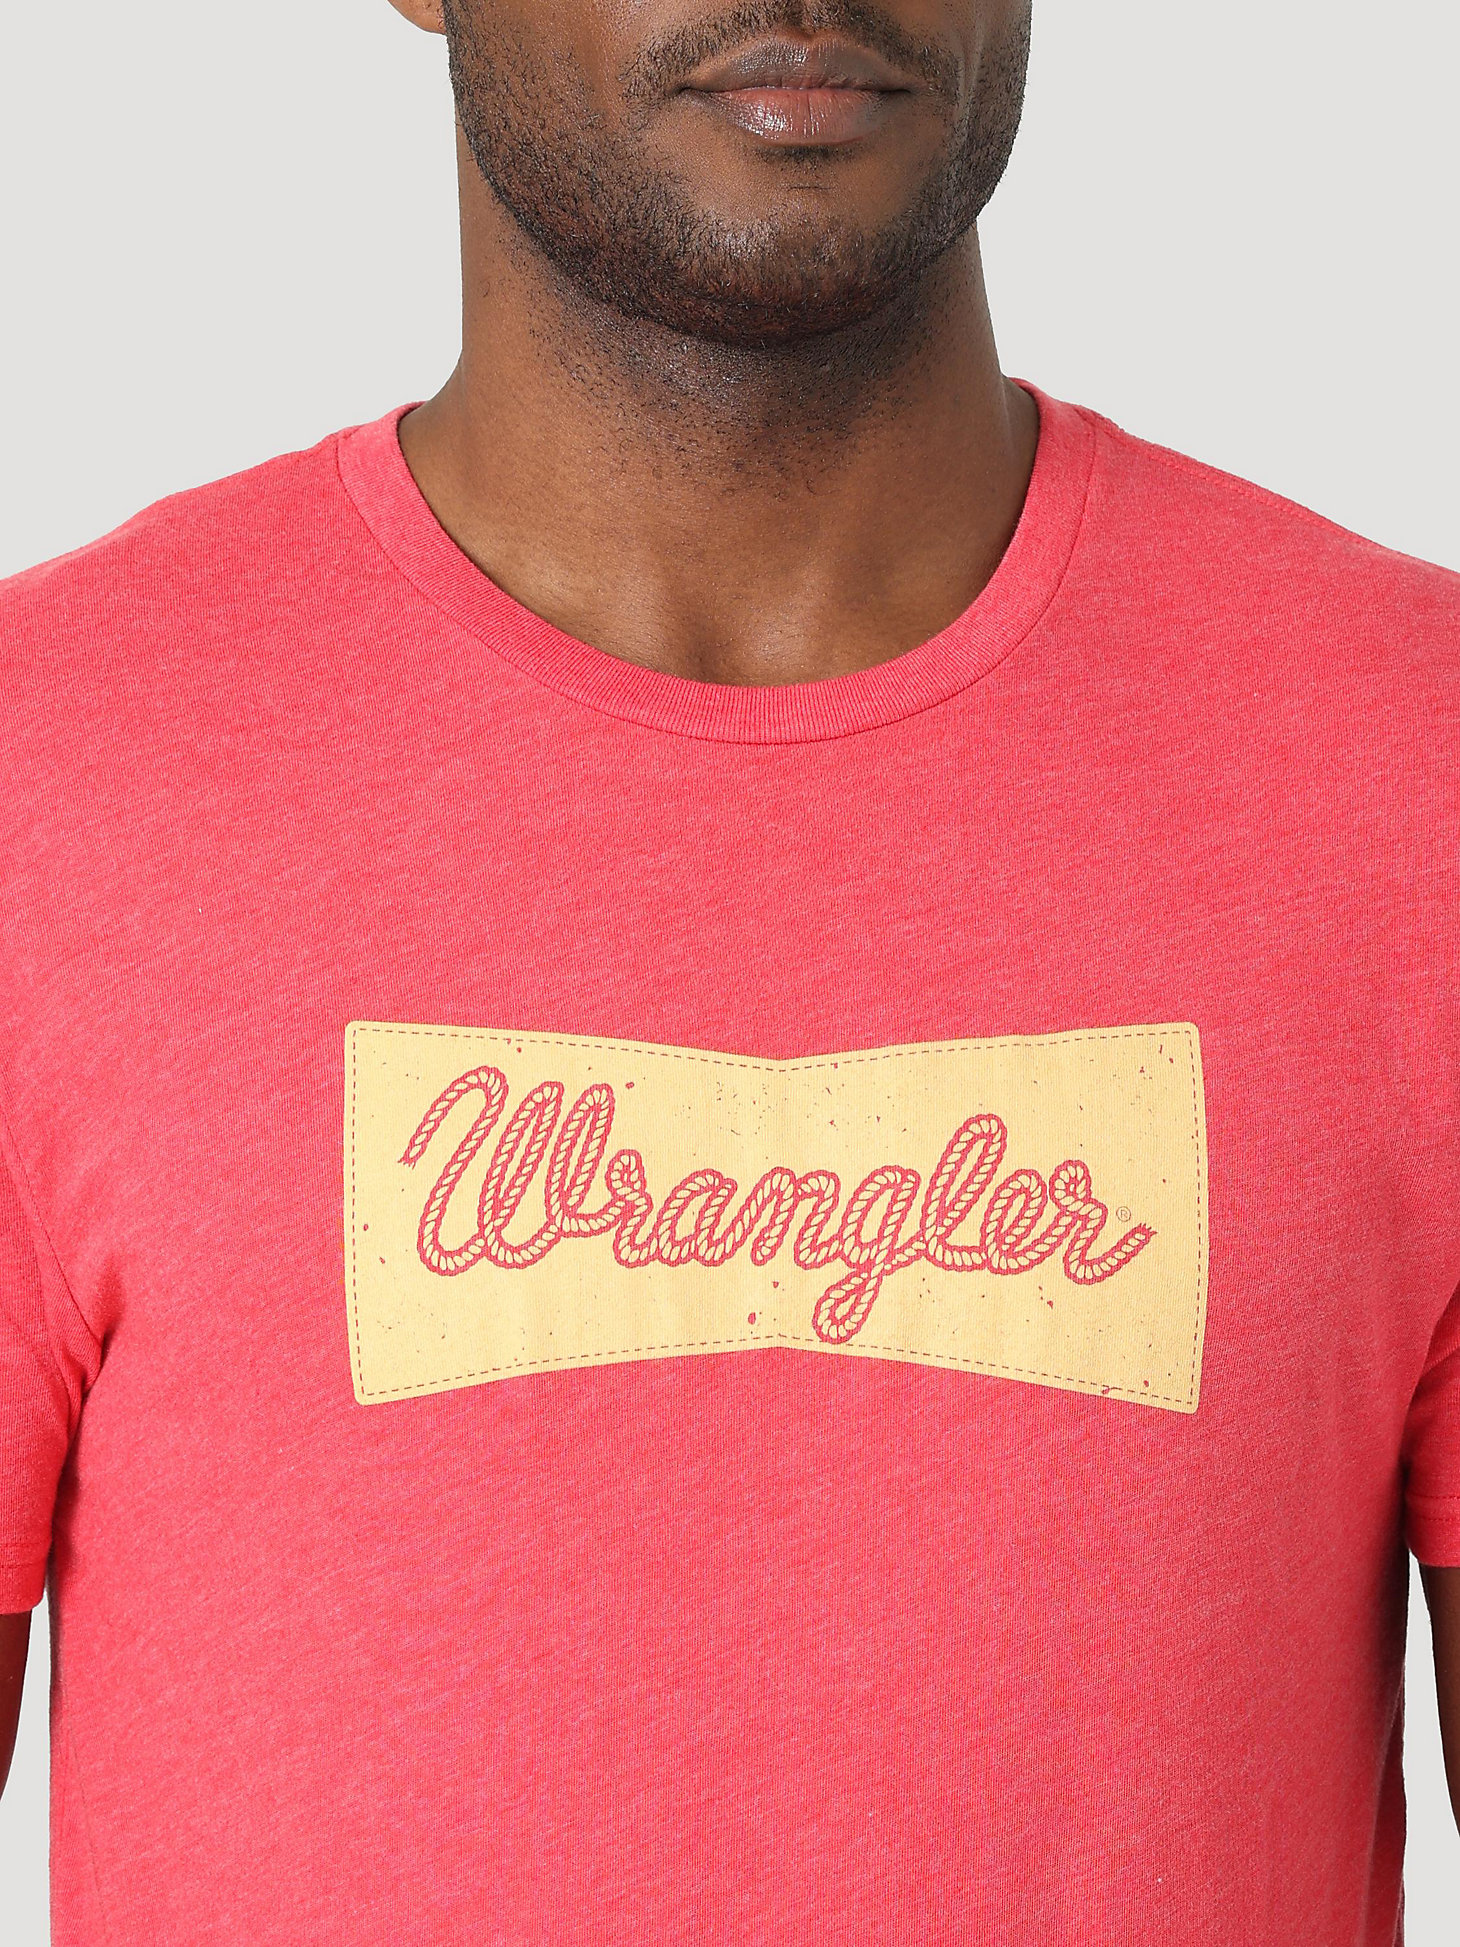 Men's Wrangler Rope Emblem Graphic T-shirt in Red Heather alternative view 1